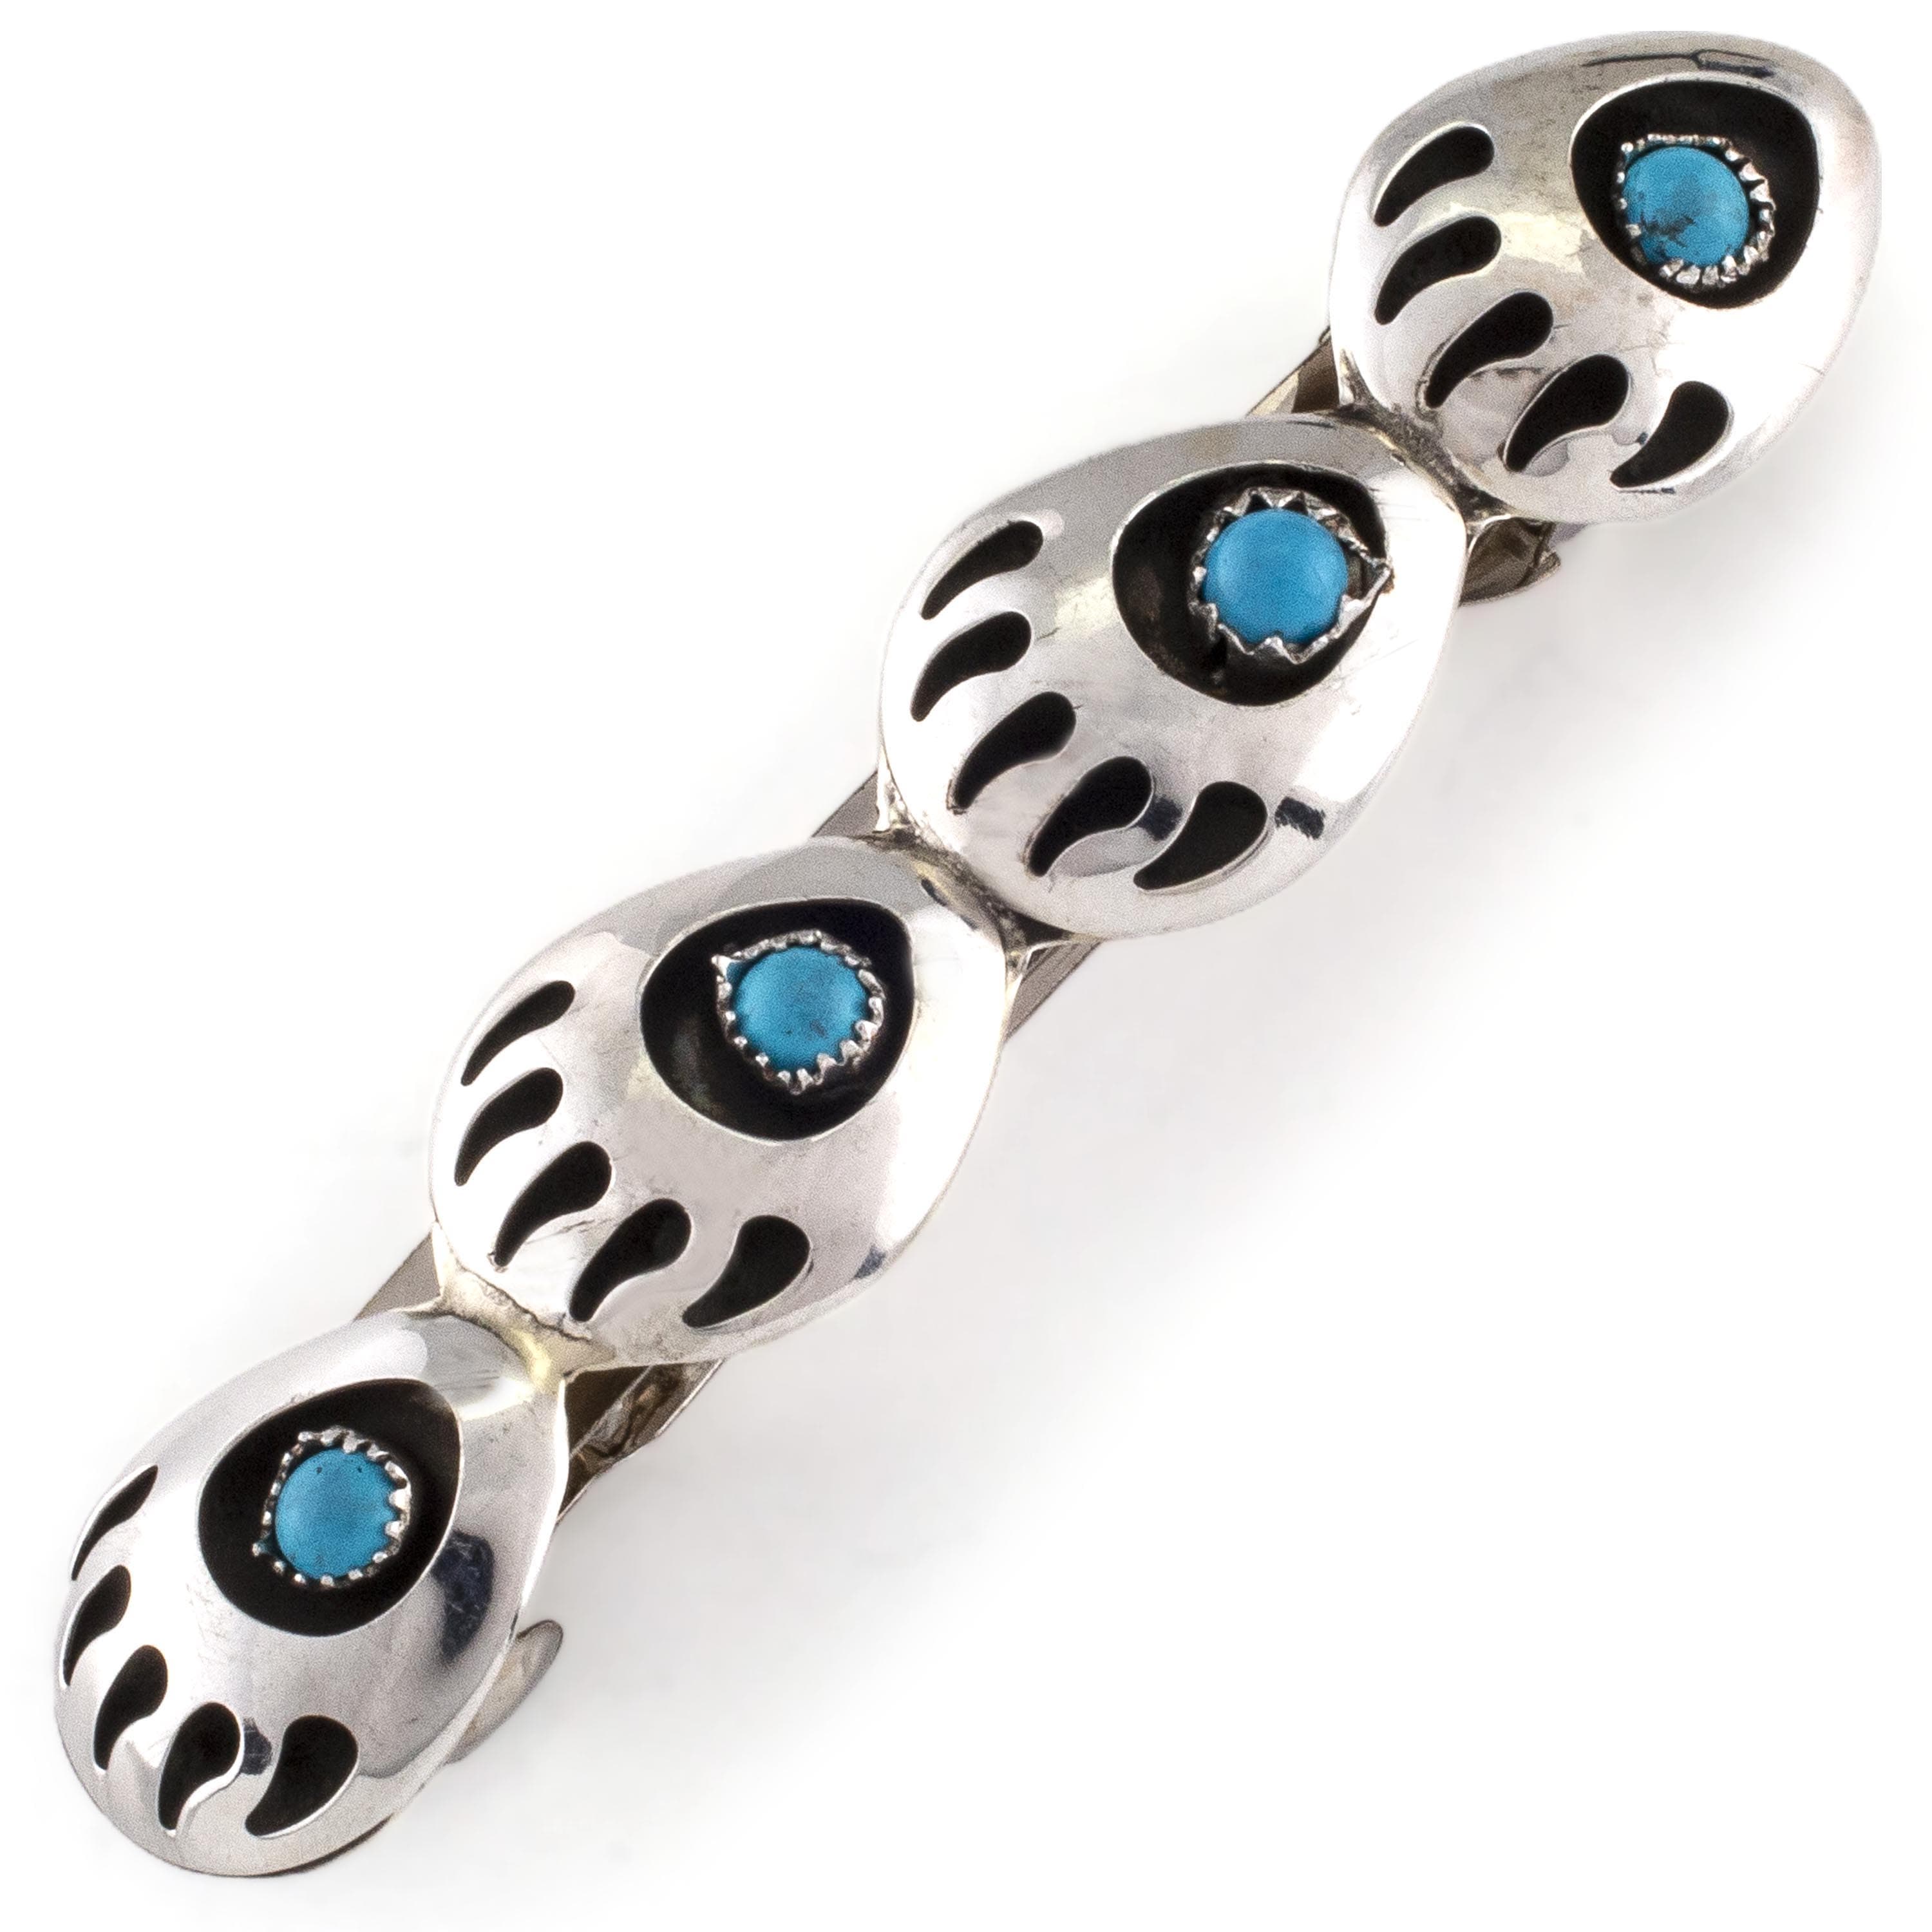 Kalifano Native American Jewelry Virginia Long Quadruple Bear Paw with Turquoise Inlay USA Native American Made 925 Sterling Silver Hair Barrette NAH160.001